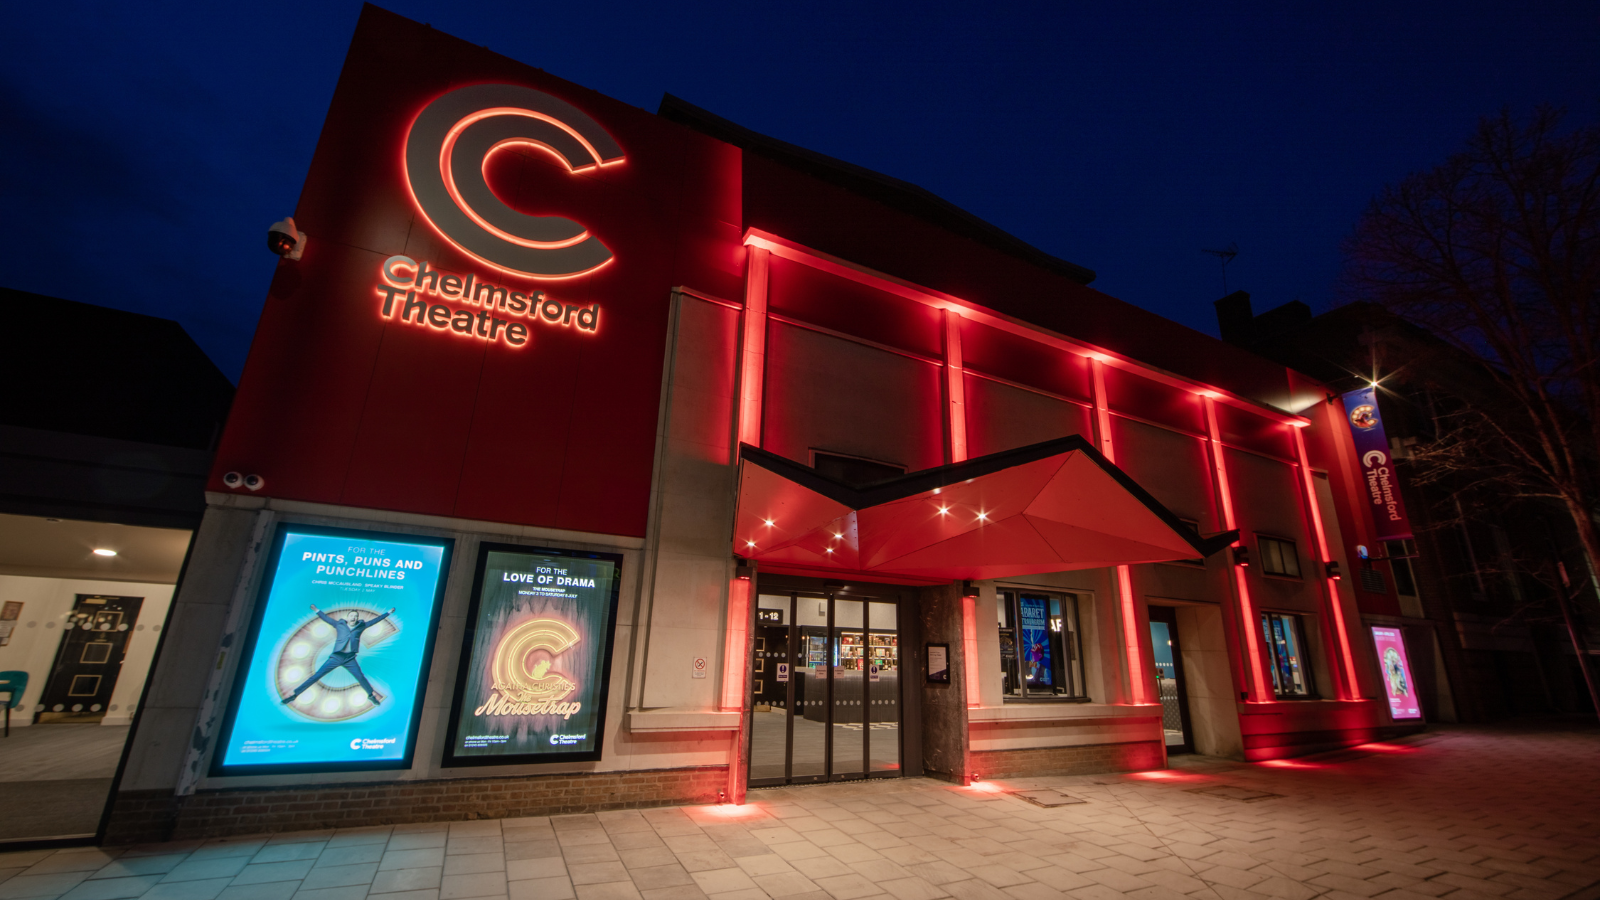 Chelmsford Theatre At Night